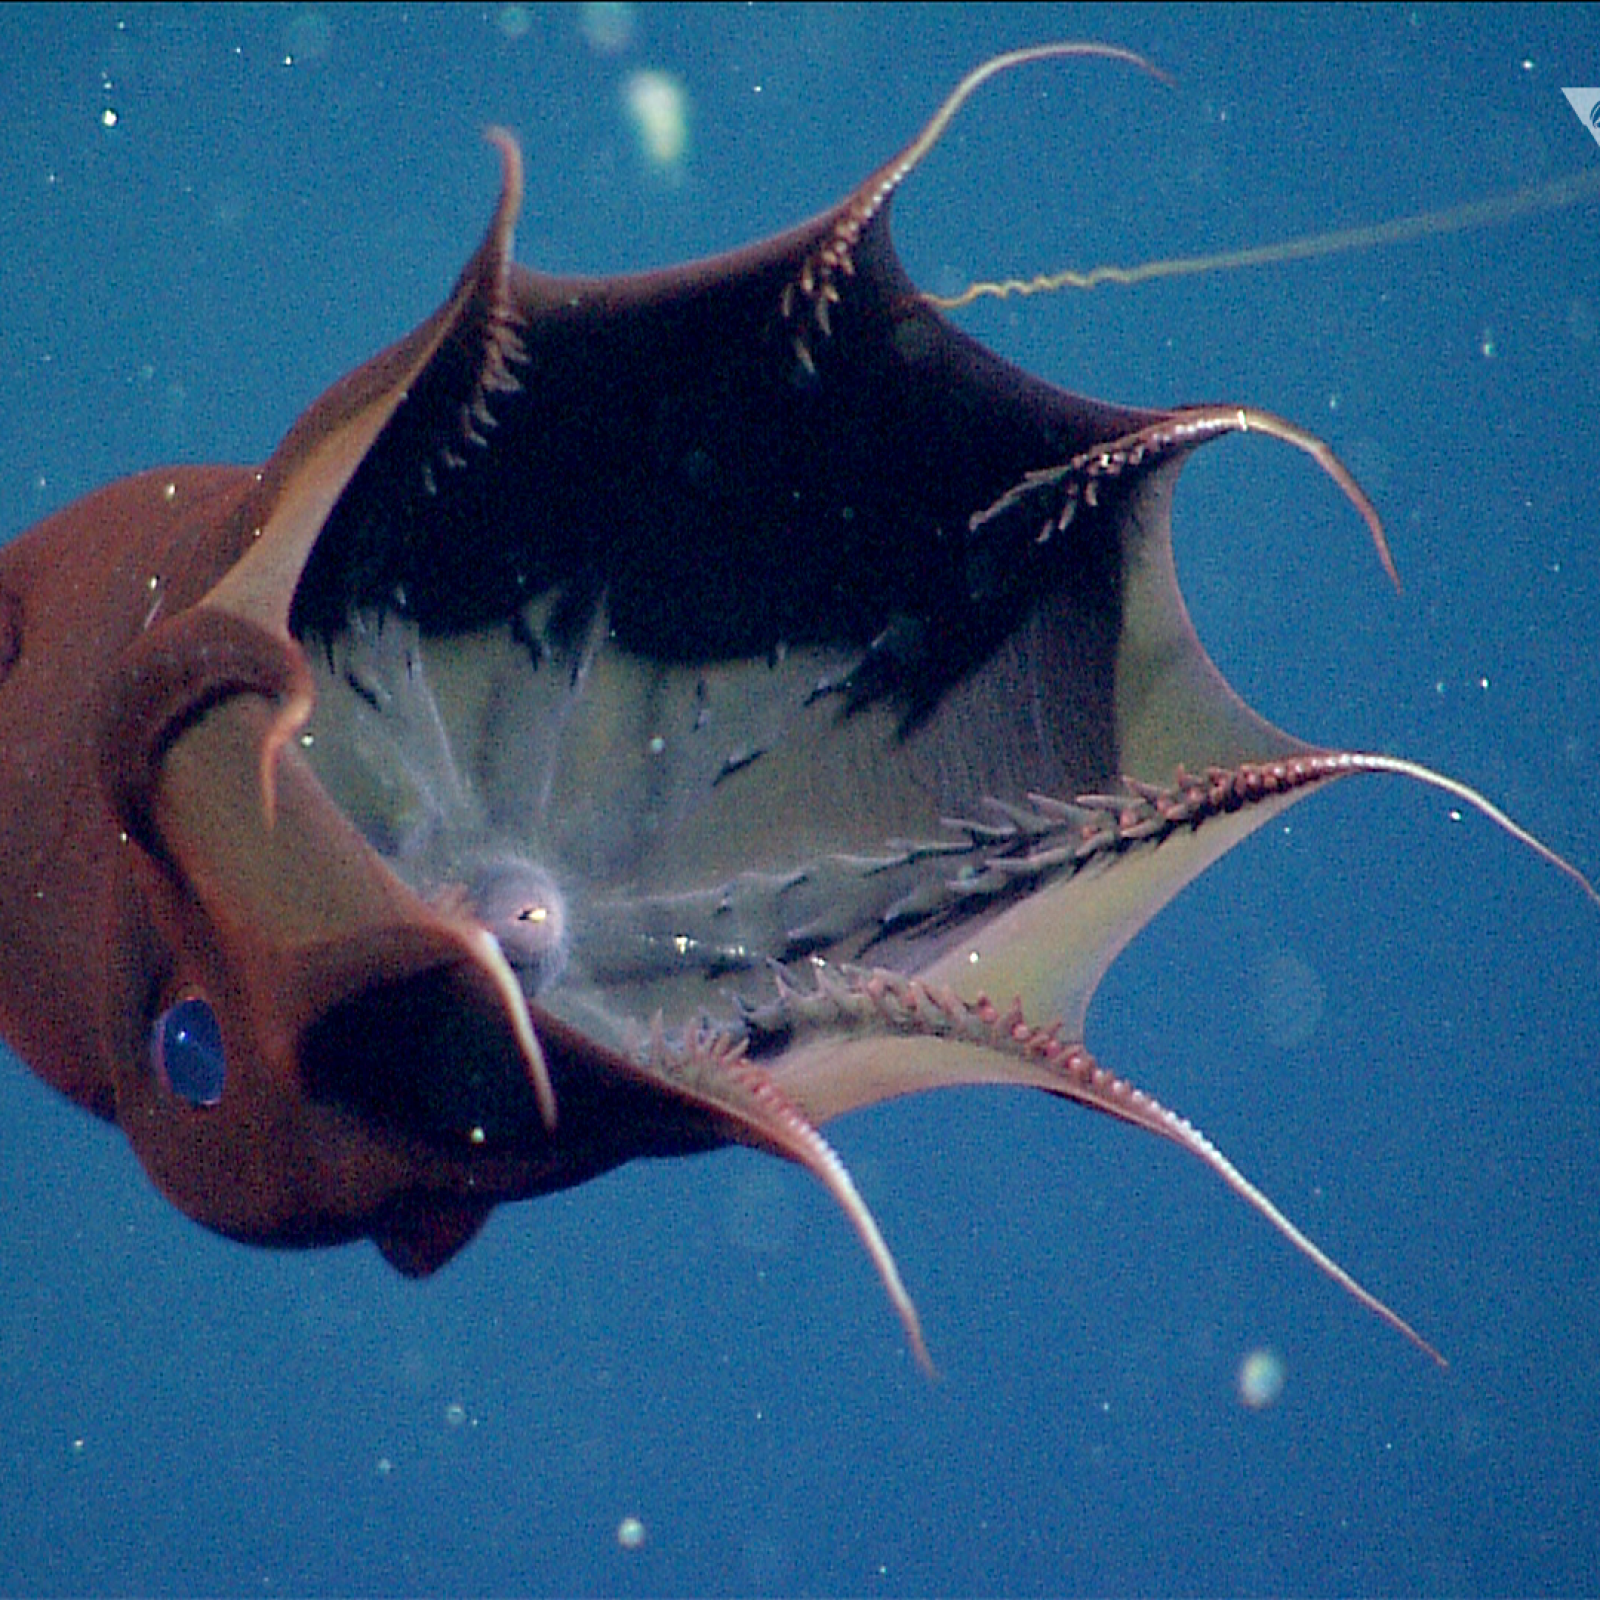 Vampire Squid From Hell Has Not Changed for Hundreds of Millions of Years